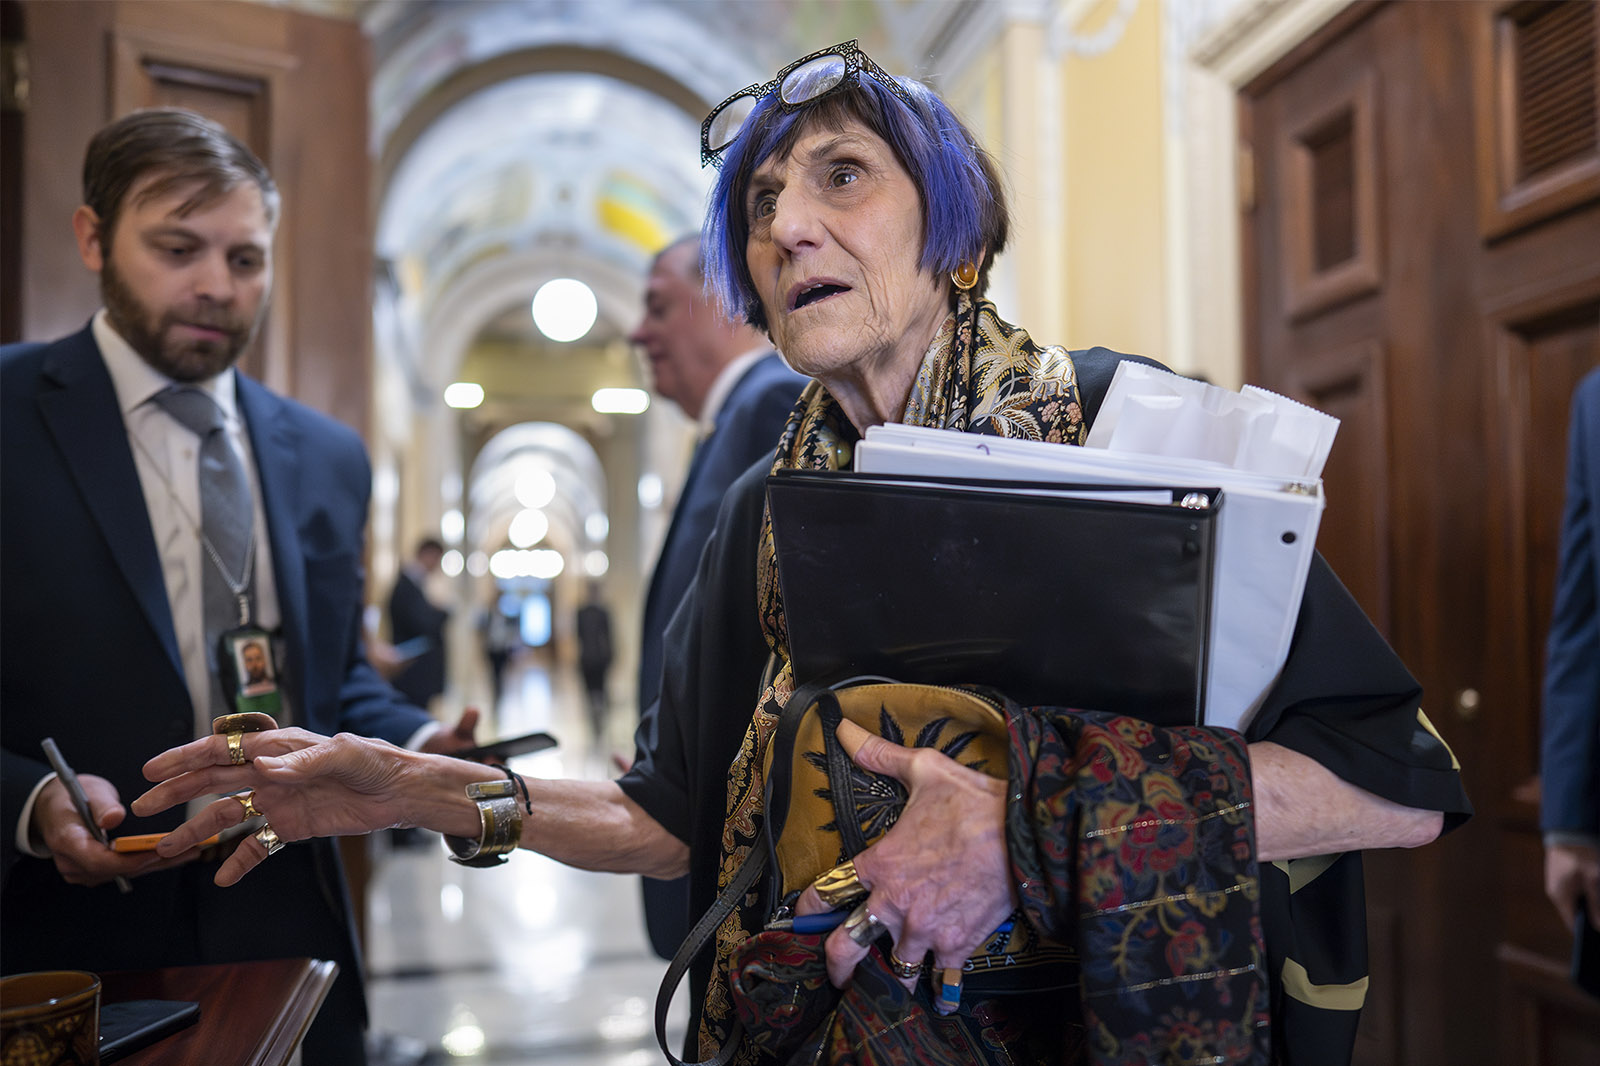 Rep. Rosa DeLauro, D-Conn., the ranking member of the House Appropriations Committee, surrenders her electronic devices as she arrives for a closed Defense Subcommittee markup hearing on the Fiscal Year 2024 spending bill for the Pentagon, at the Capitol in Washington, Thursday, June 15, 2023. (AP Photo/J. Scott Applewhite)